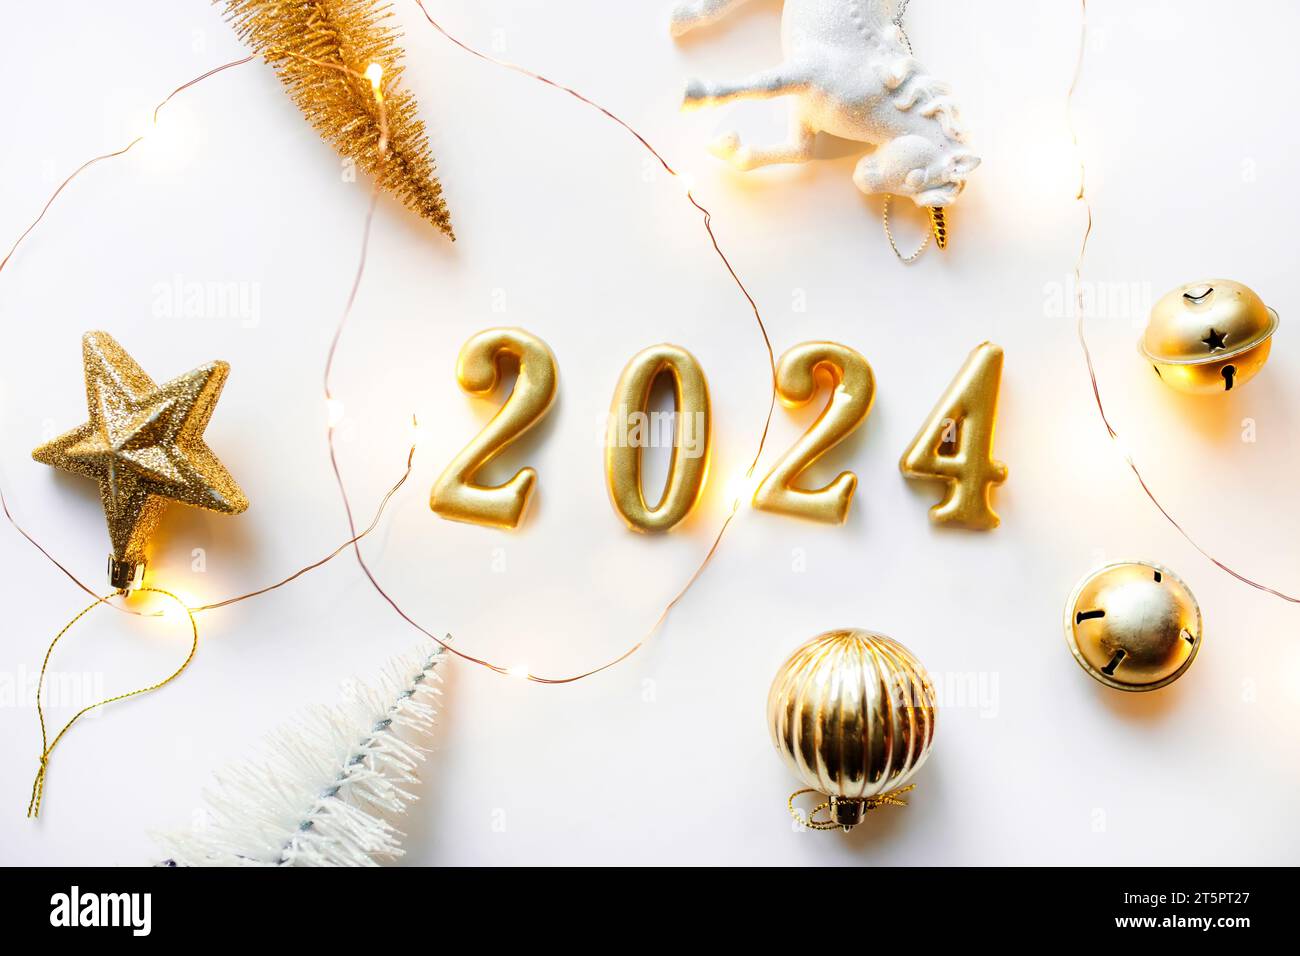 Holiday background Happy New Year 2024. Figures 2024 on a white background with Christmas decorations, balls and a unicorn. Stock Photo